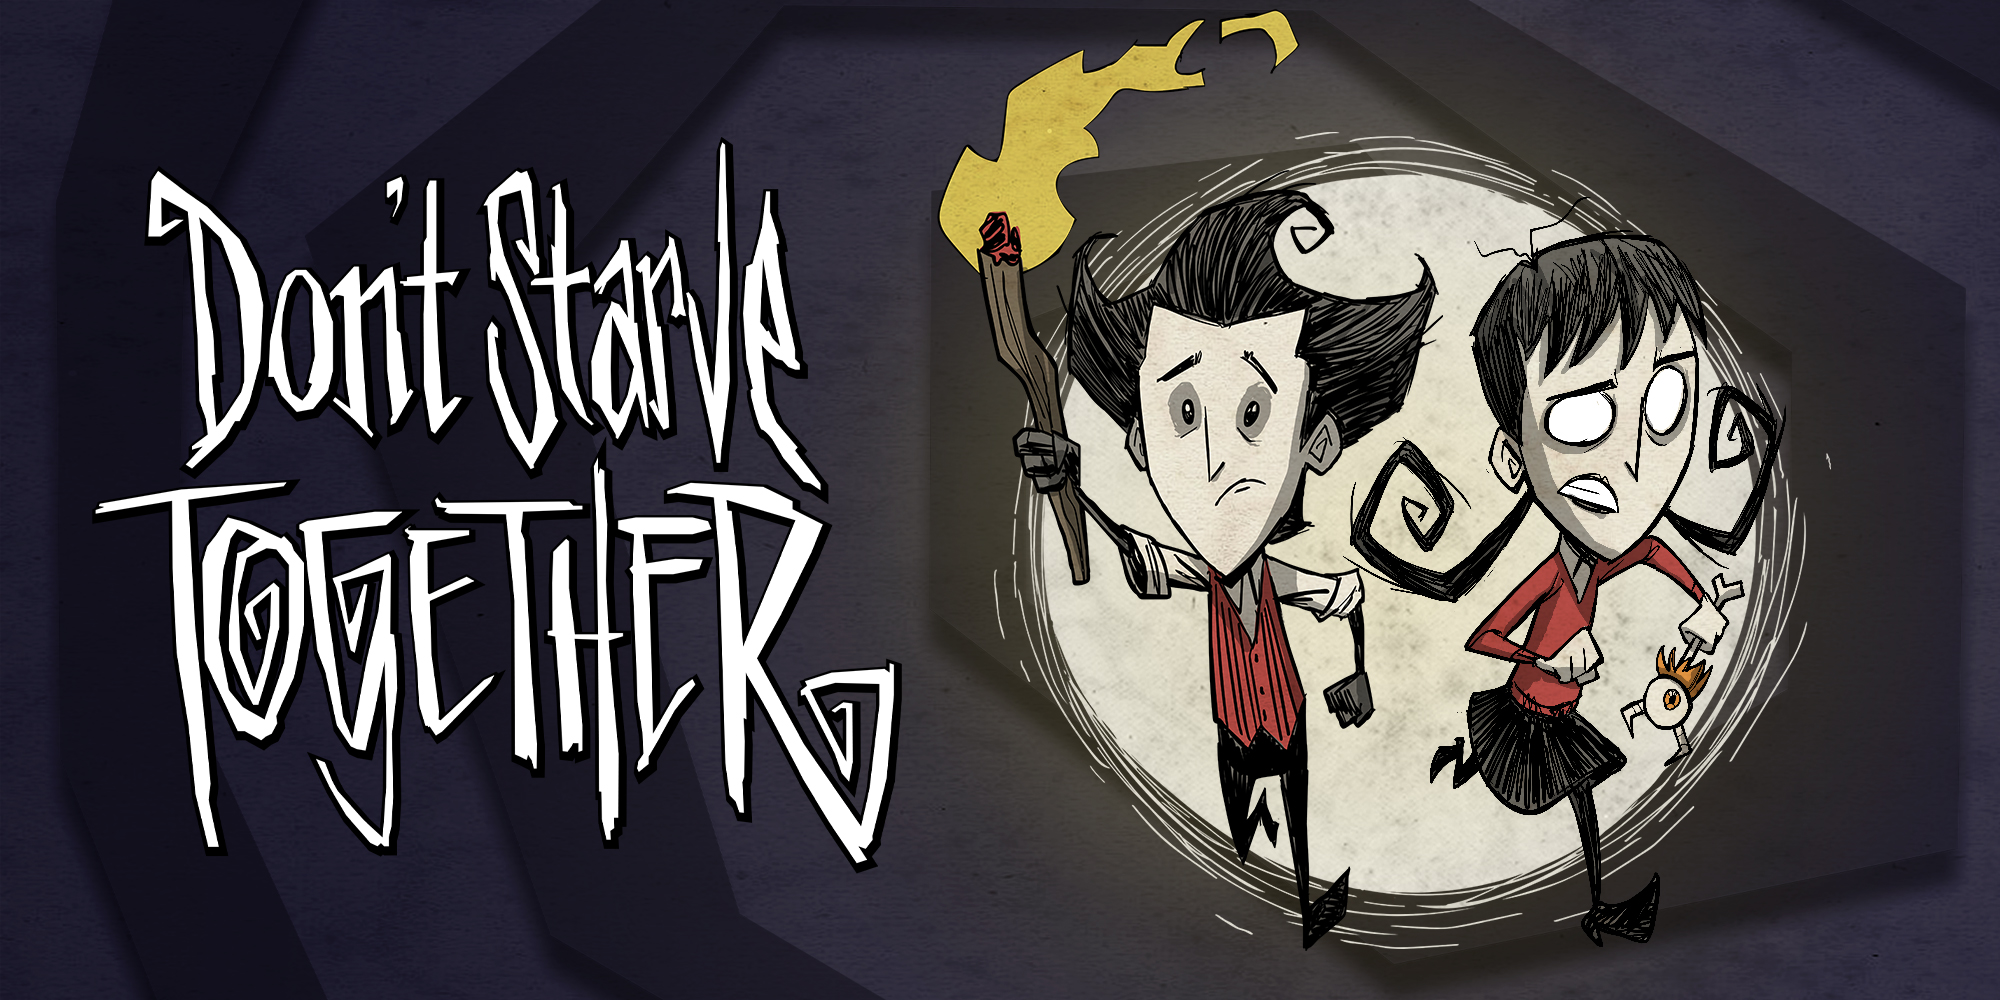 Don starve together steam items фото 16